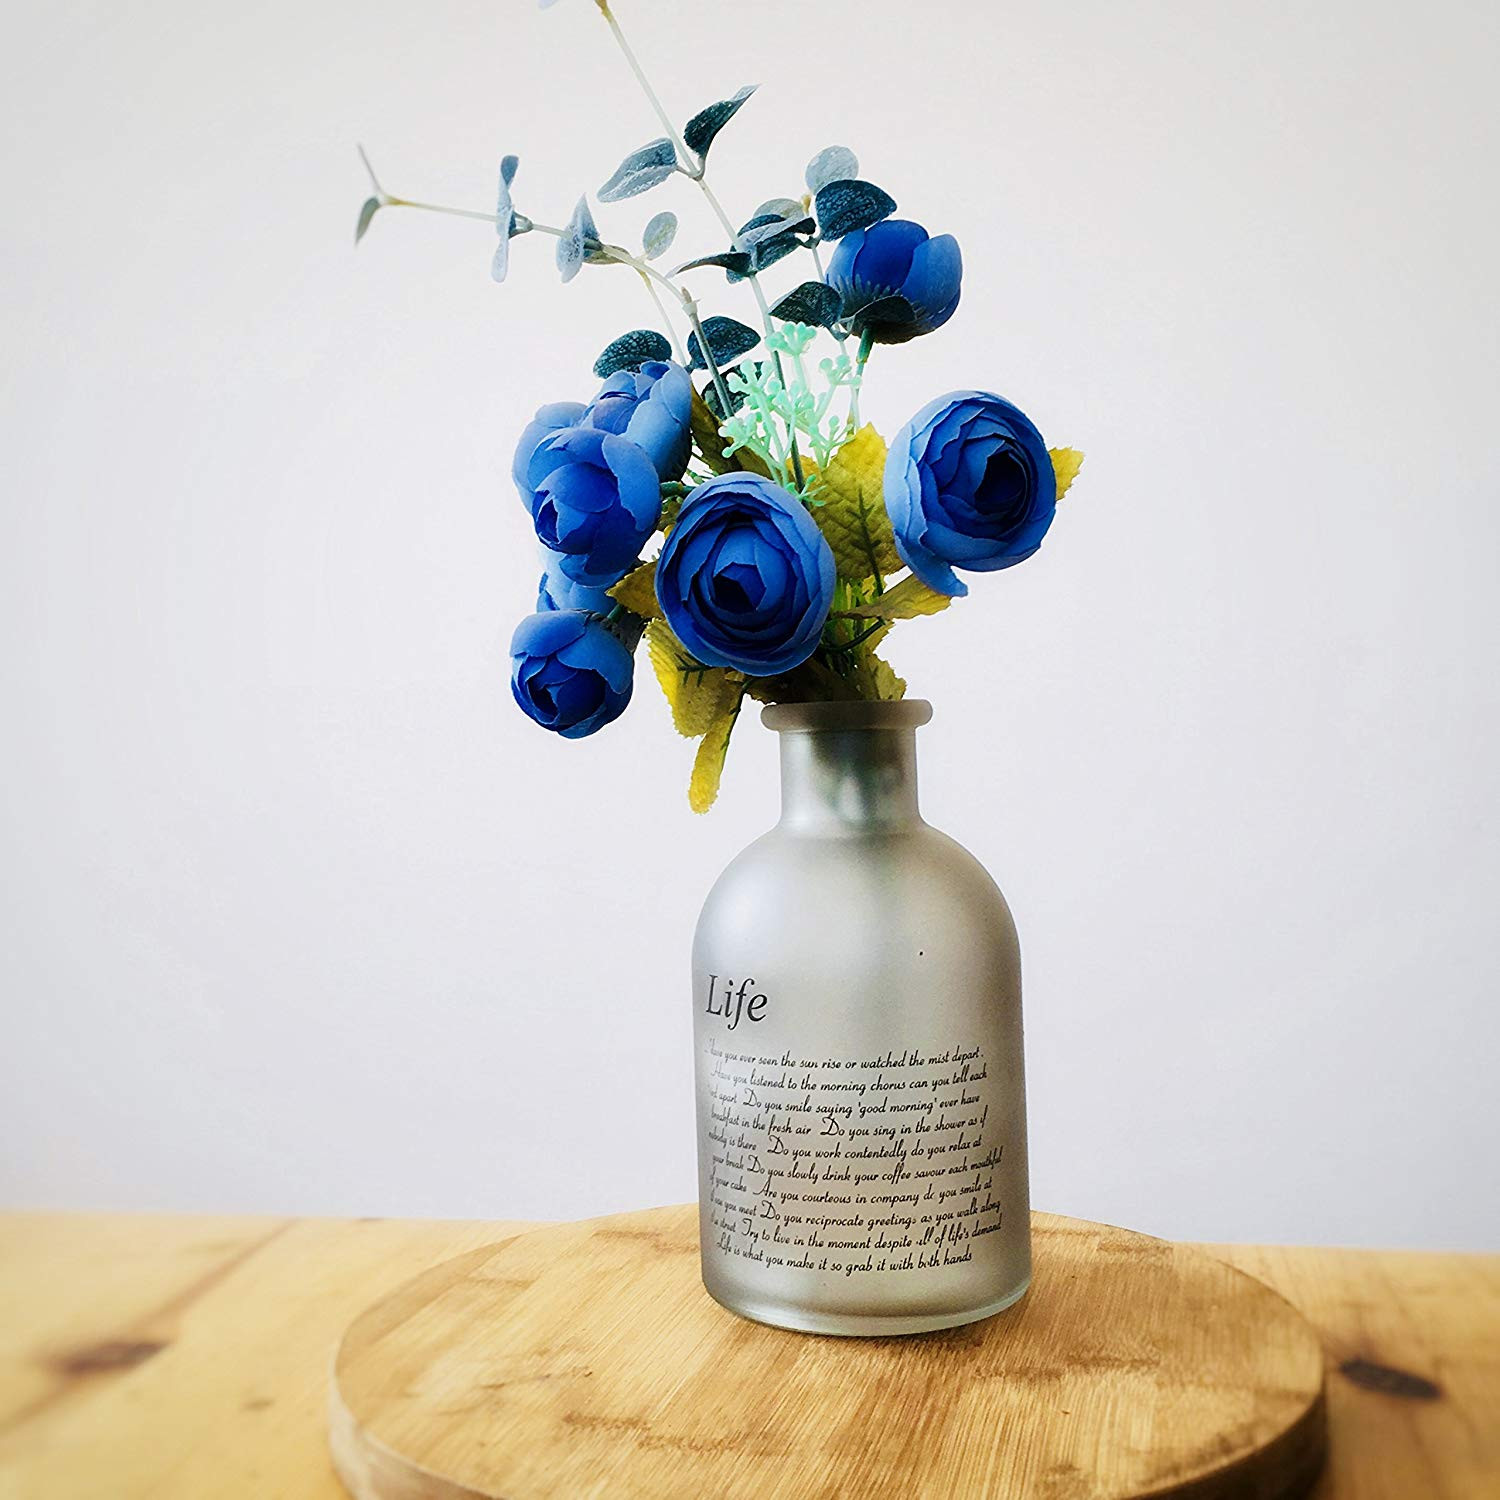 16 Fabulous Vintage Tall Blue Glass Vase 2024 free download vintage tall blue glass vase of amazon com flowersea decorative frosted glass bottle bud vases for in amazon com flowersea decorative frosted glass bottle bud vases for flowers modern design